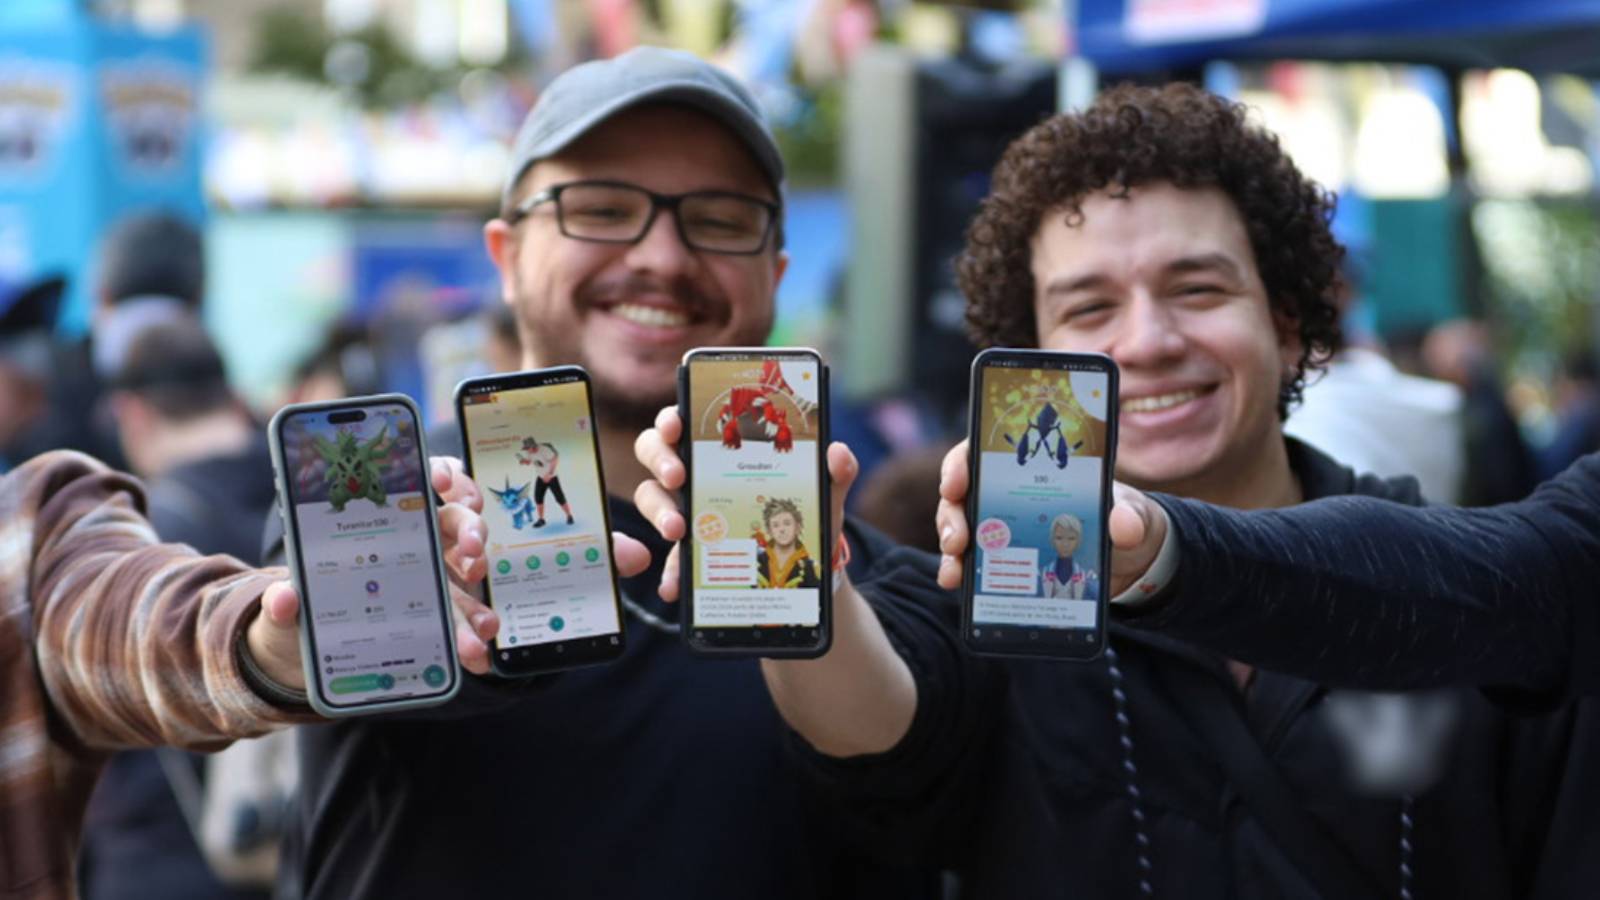 Several Pokemon Go players hold up phones